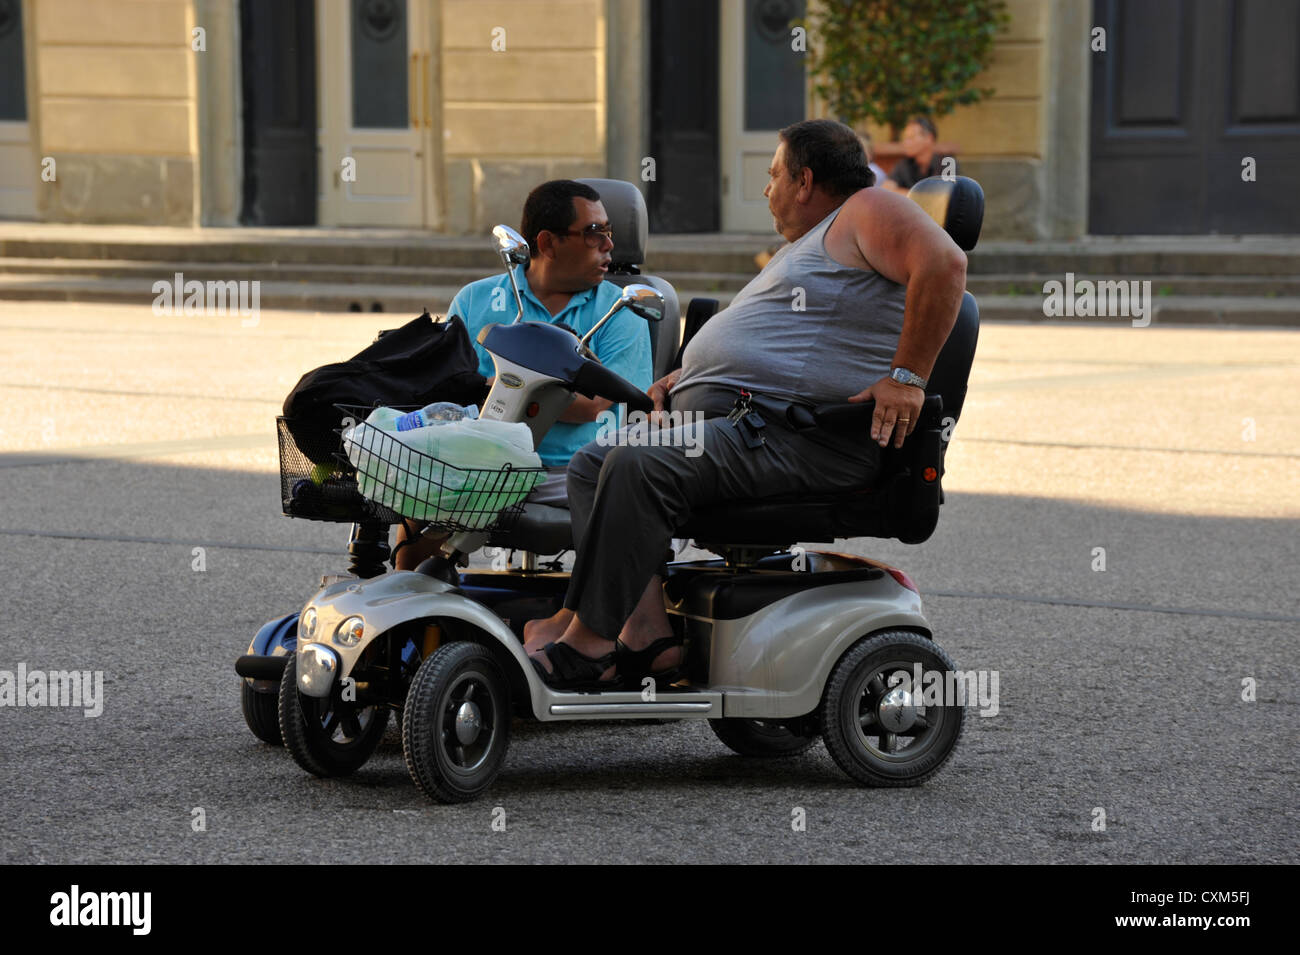 Two people on disability scooters in Lucca Tuscany Italy Stock Photo